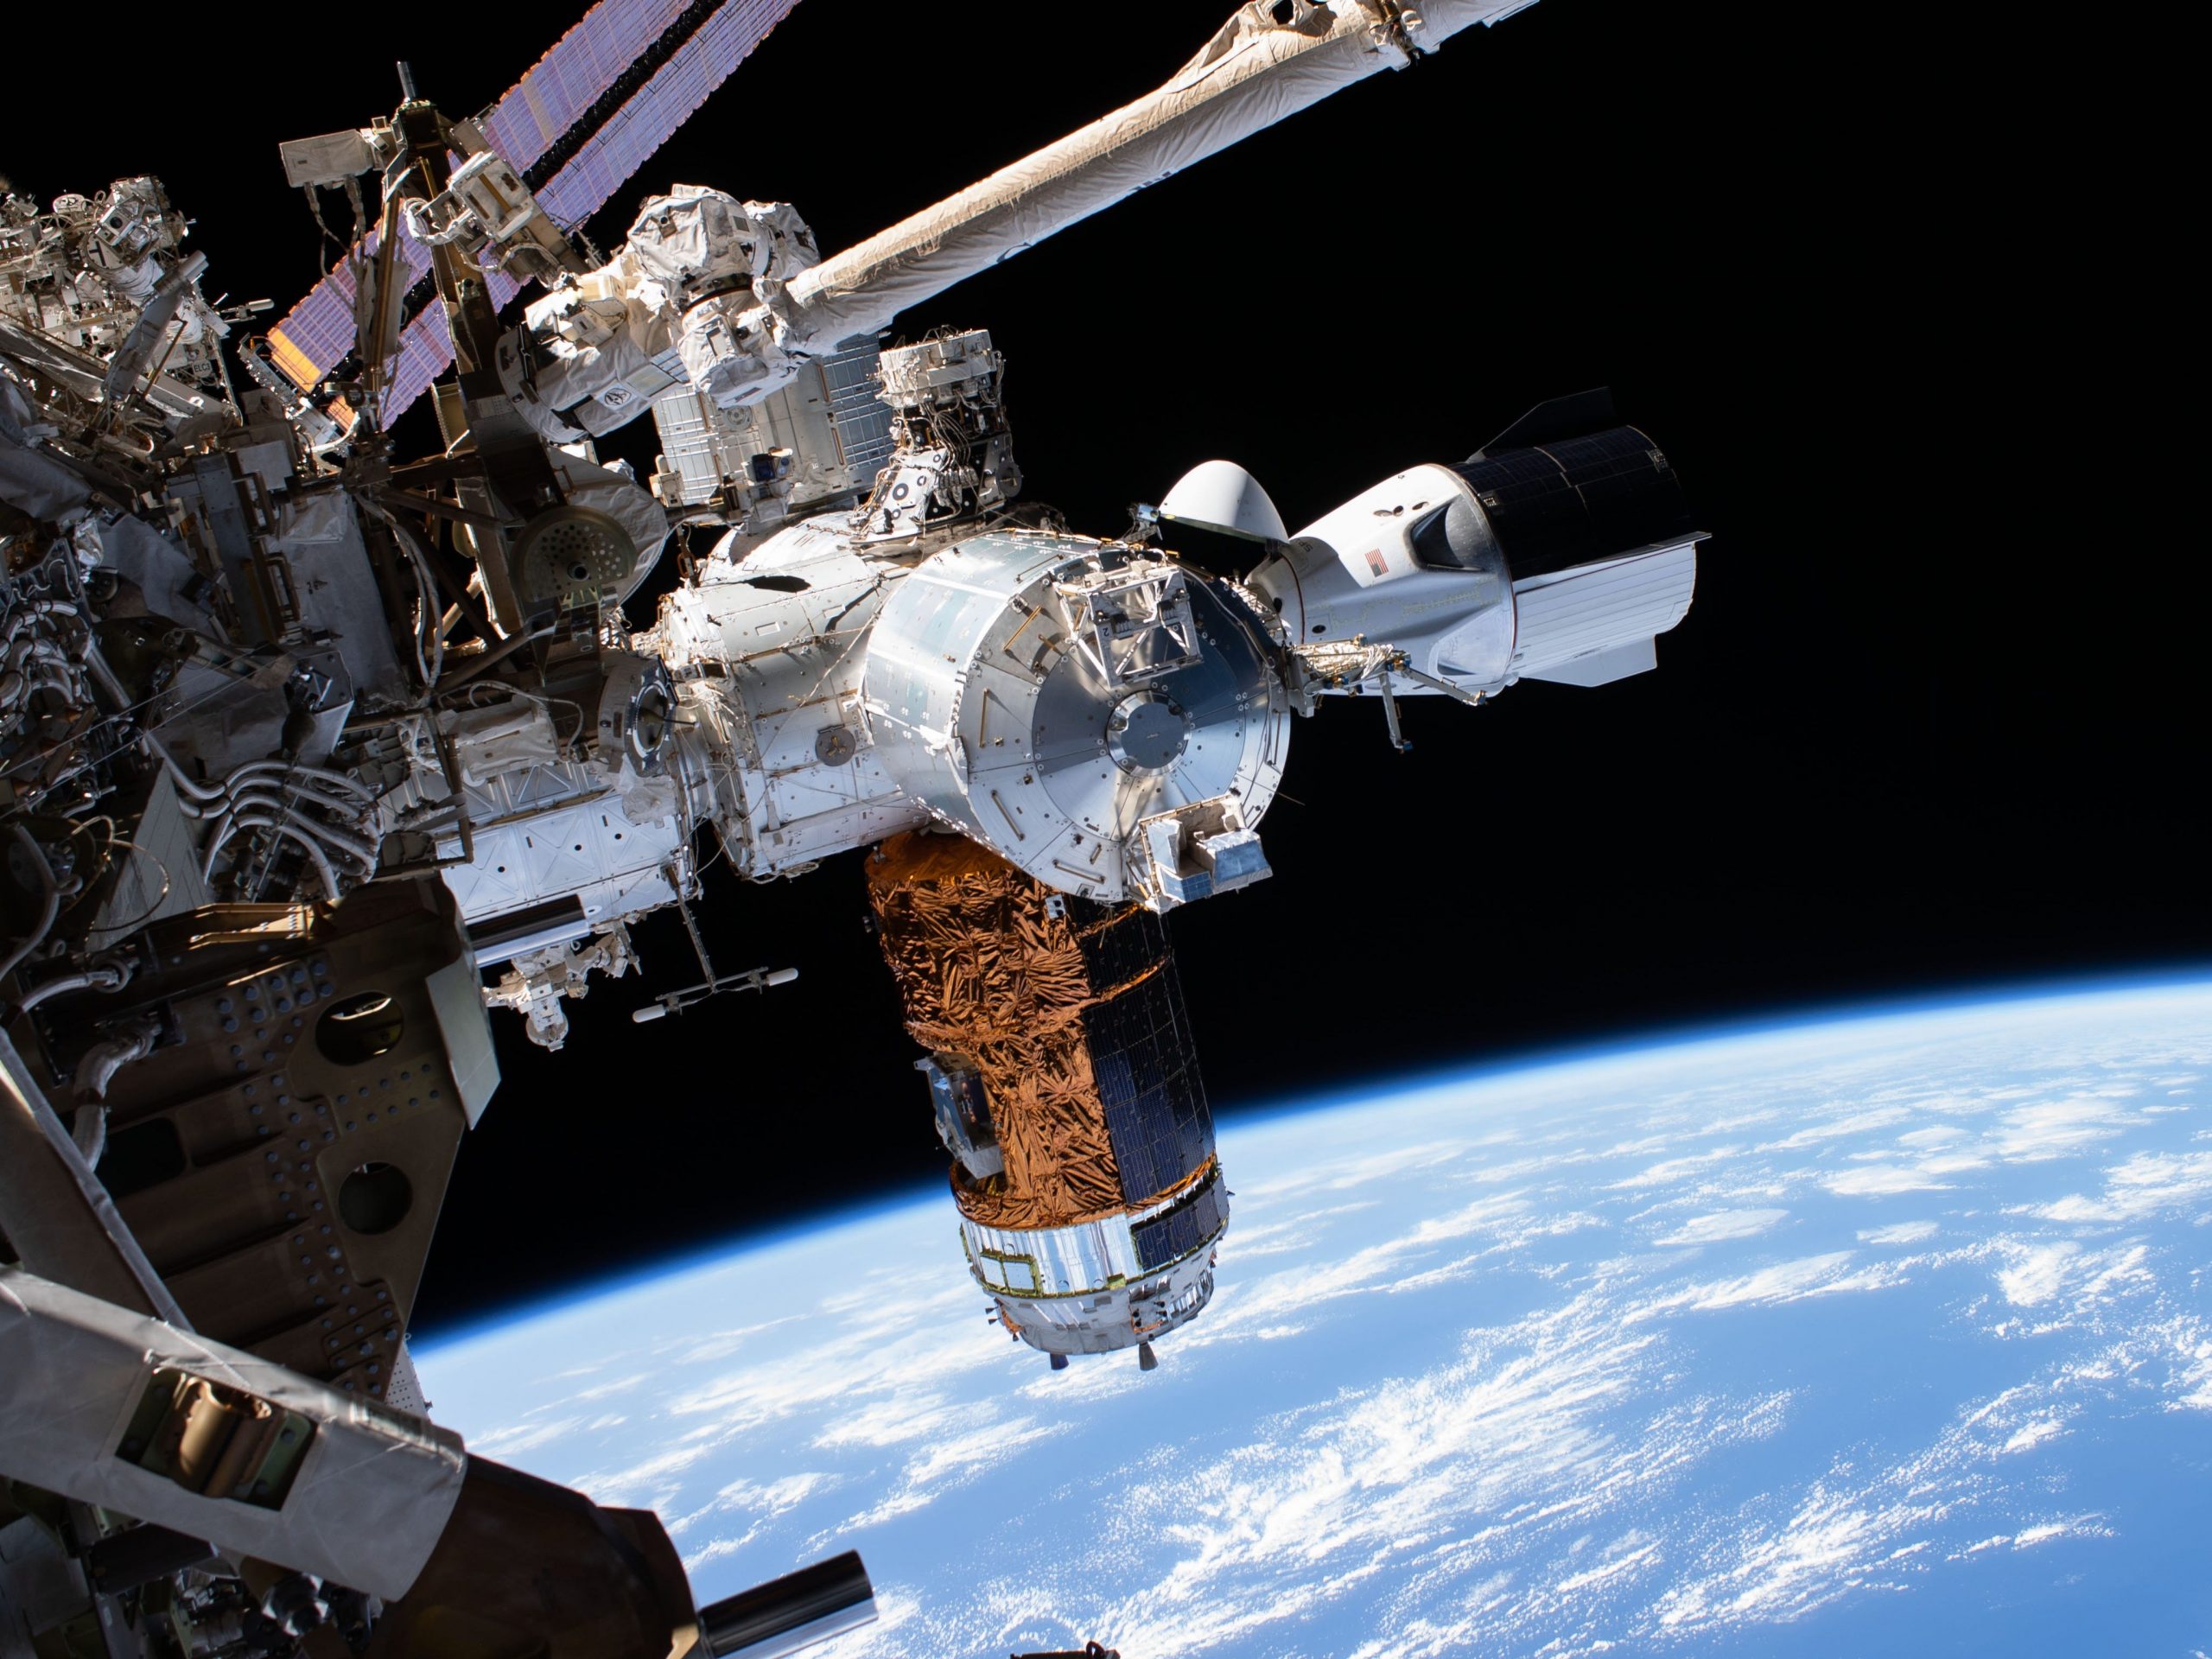 spacex crew dragon endeavour docked international space station iss july 1 2020 iss063e034054